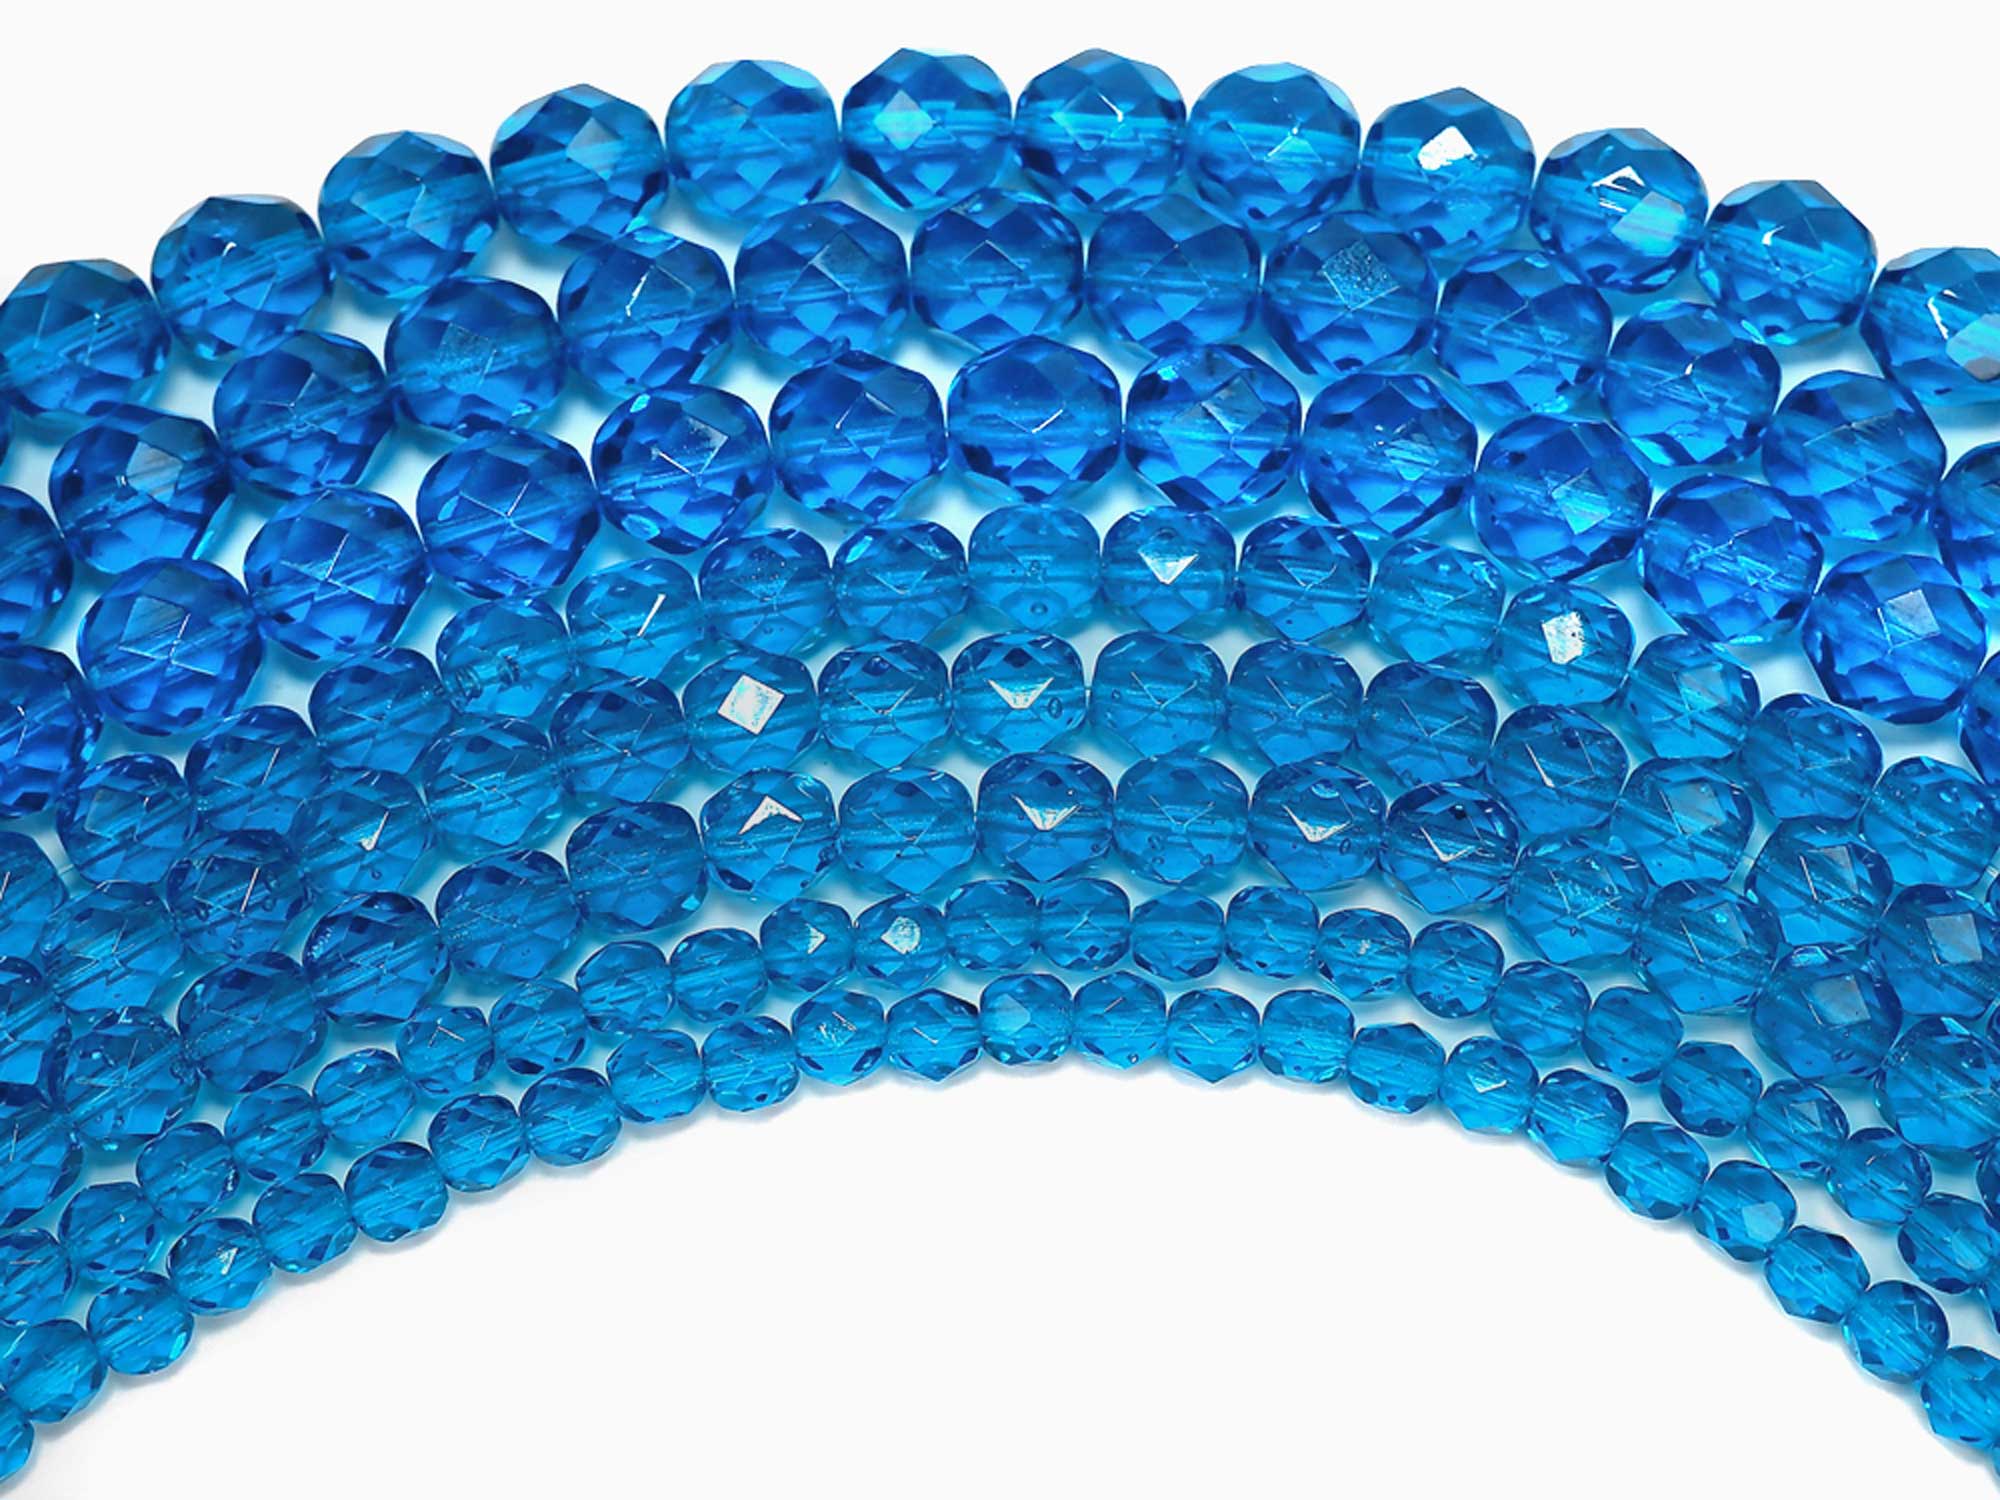 Capri Blue Light, Czech Fire Polished Round Faceted Glass Beads, 16 inch strand